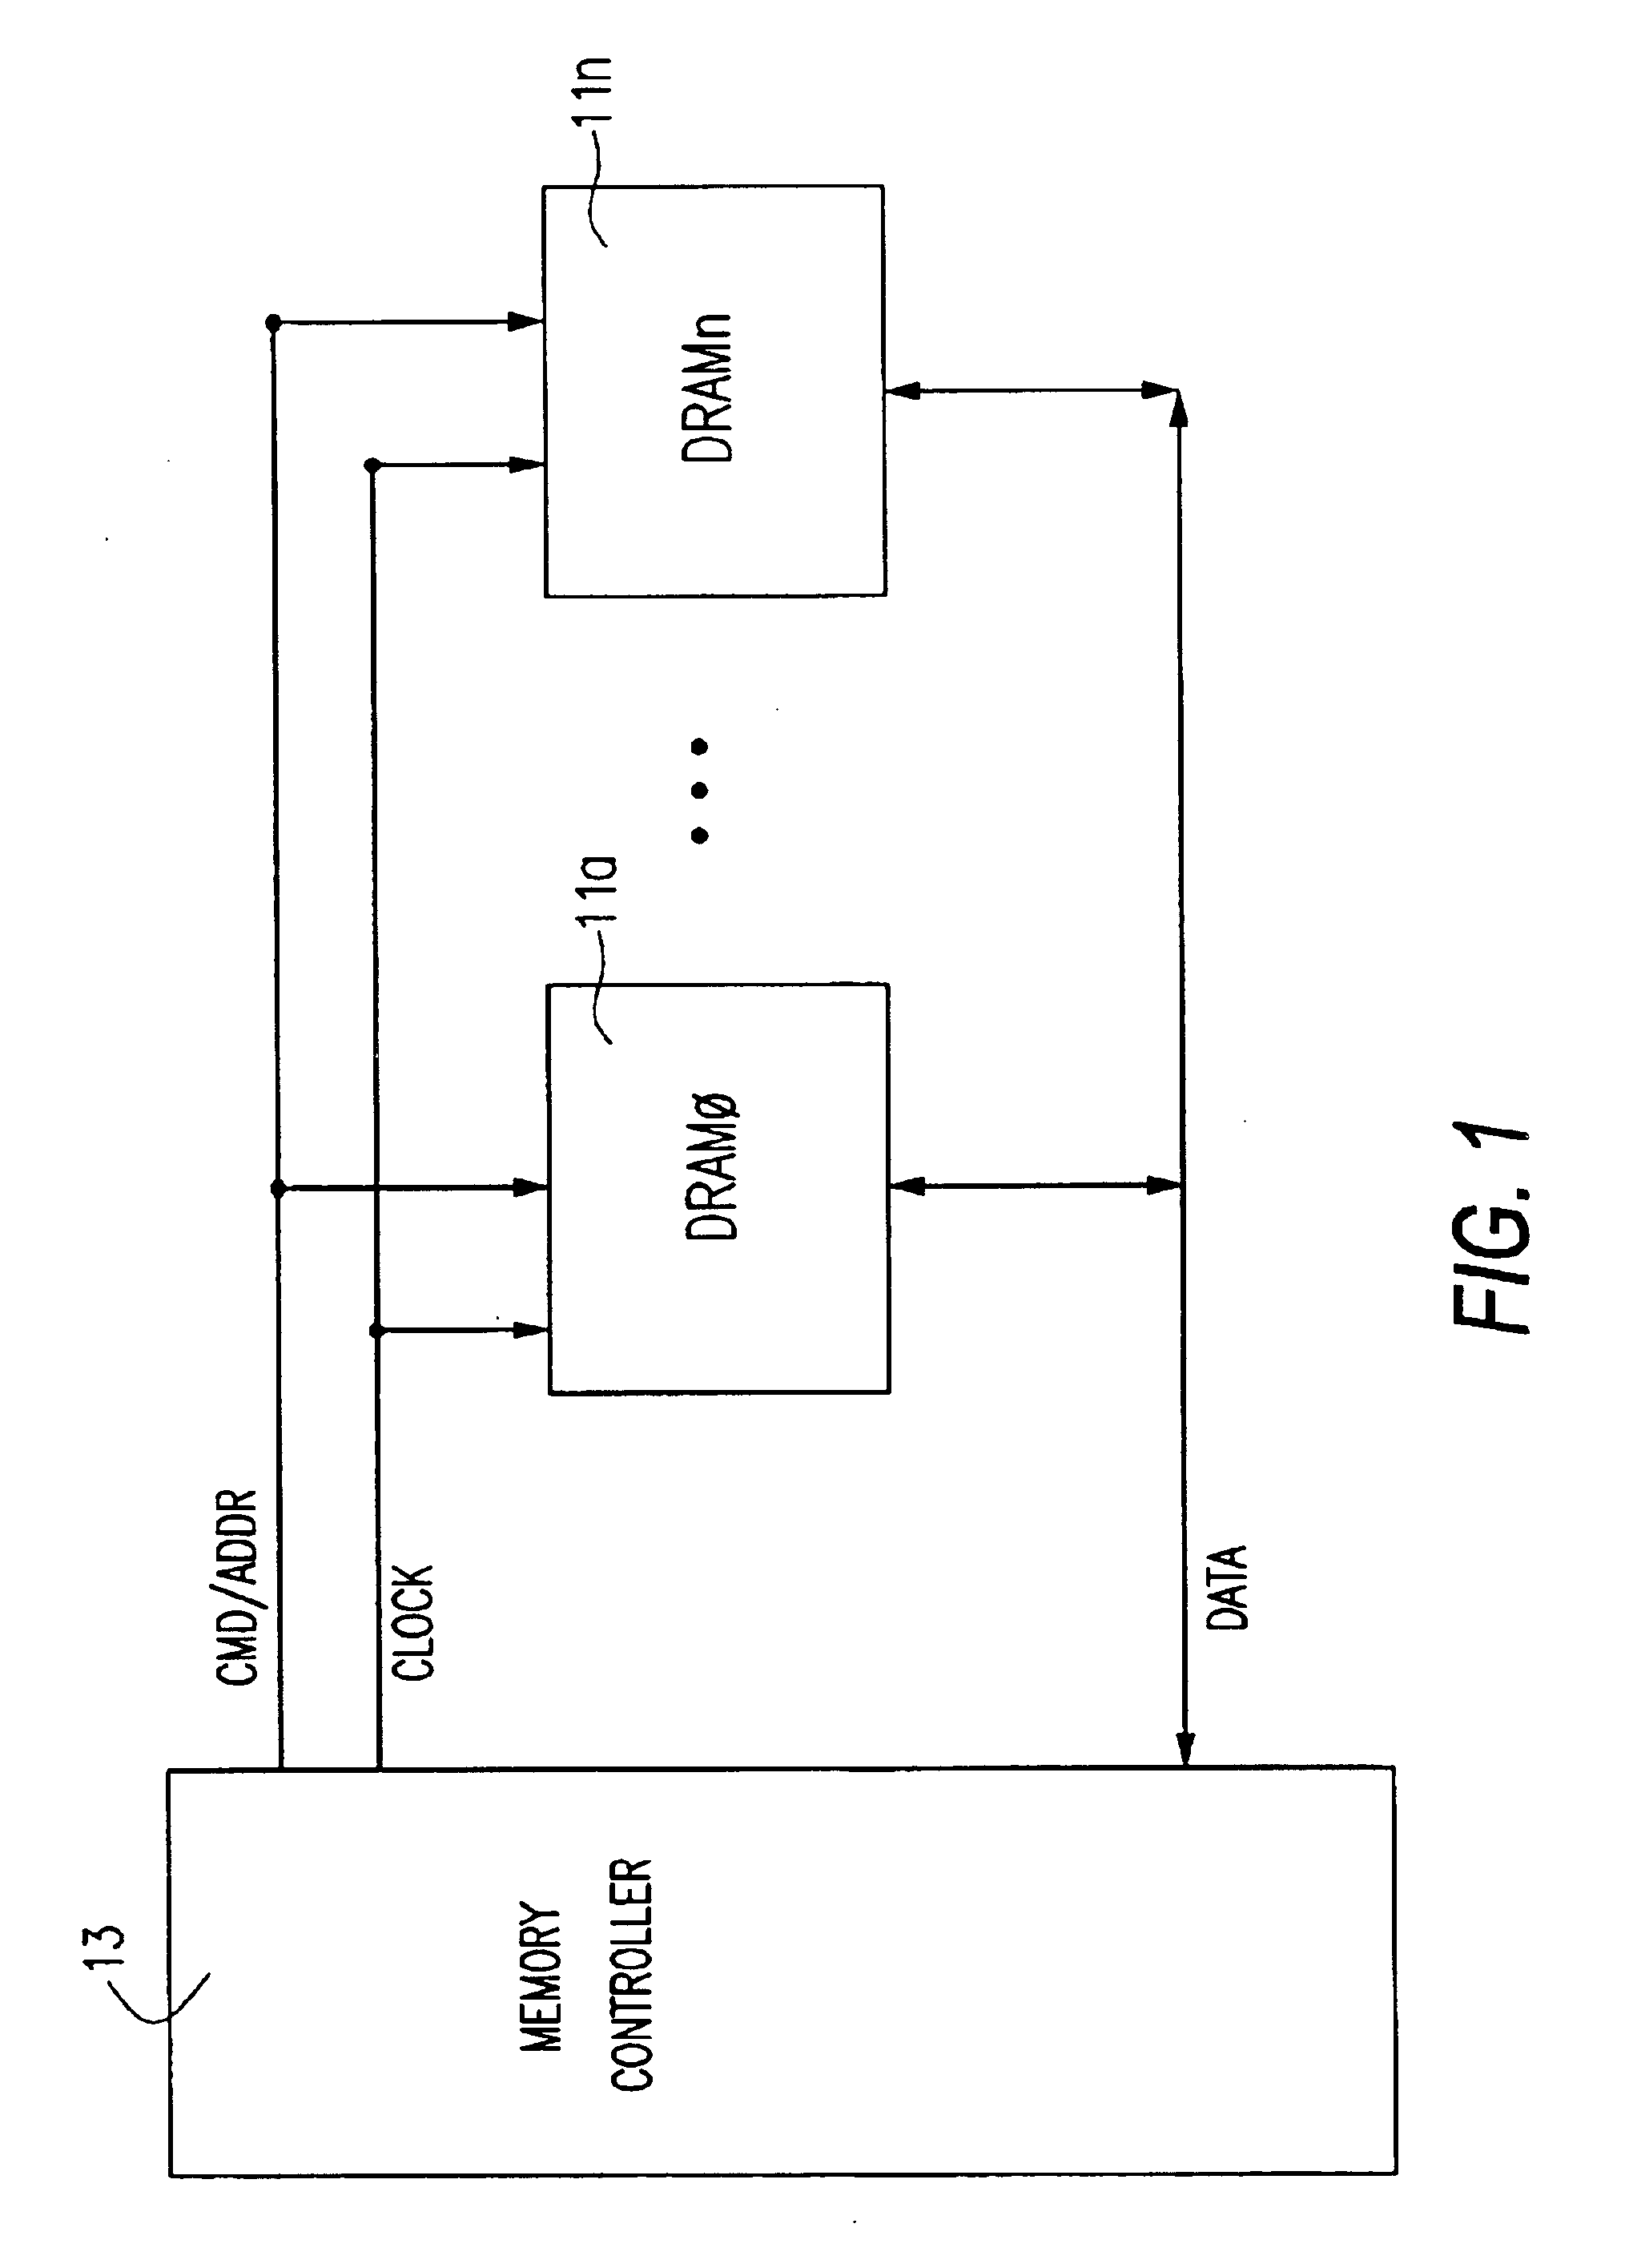 Device and system for adjusting delay in a data path based on comparison of data from a latch and data from a register